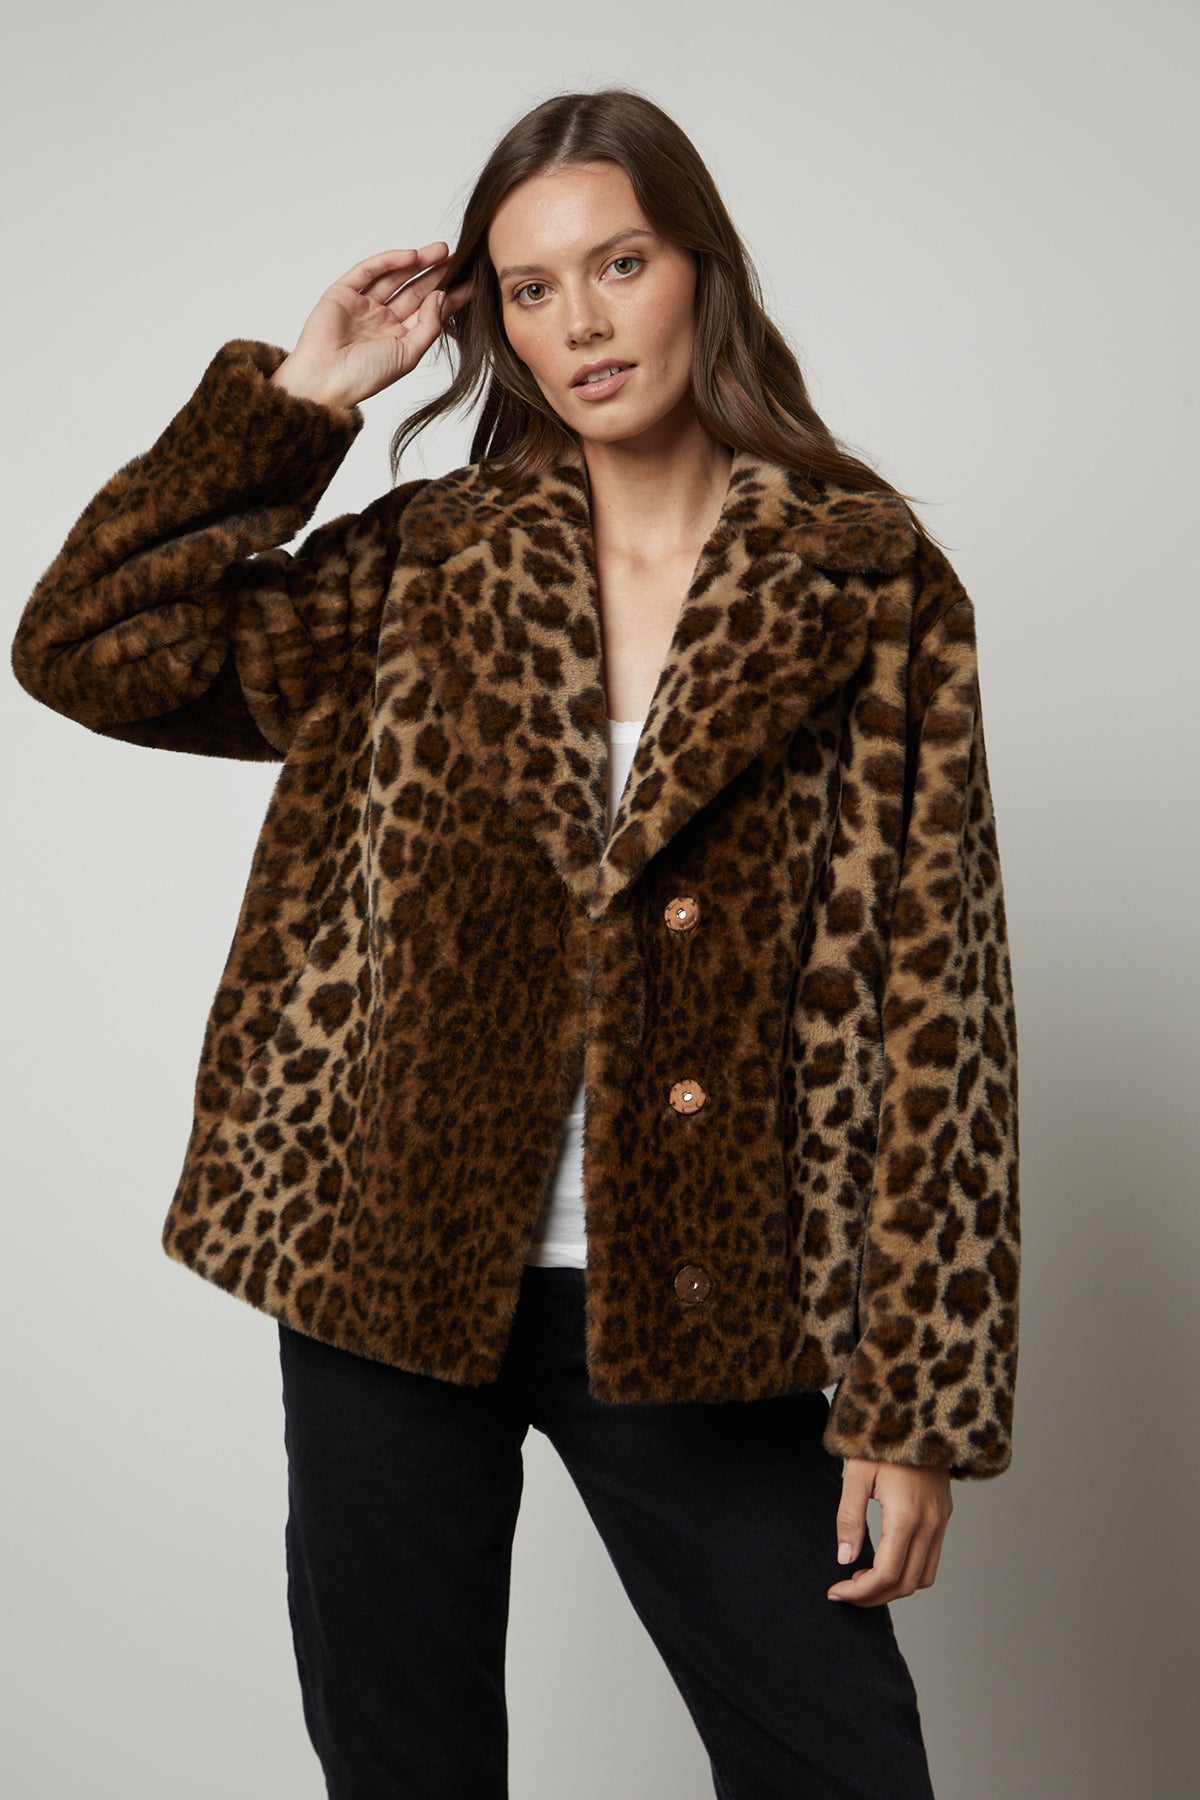 A woman wears a Velvet by Graham & Spencer AMANI LEOPARD LUX FAUX FUR JACKET, perfect for a fall wardrobe, and poses against a plain background. She has one hand raised to her head.-35766165078209